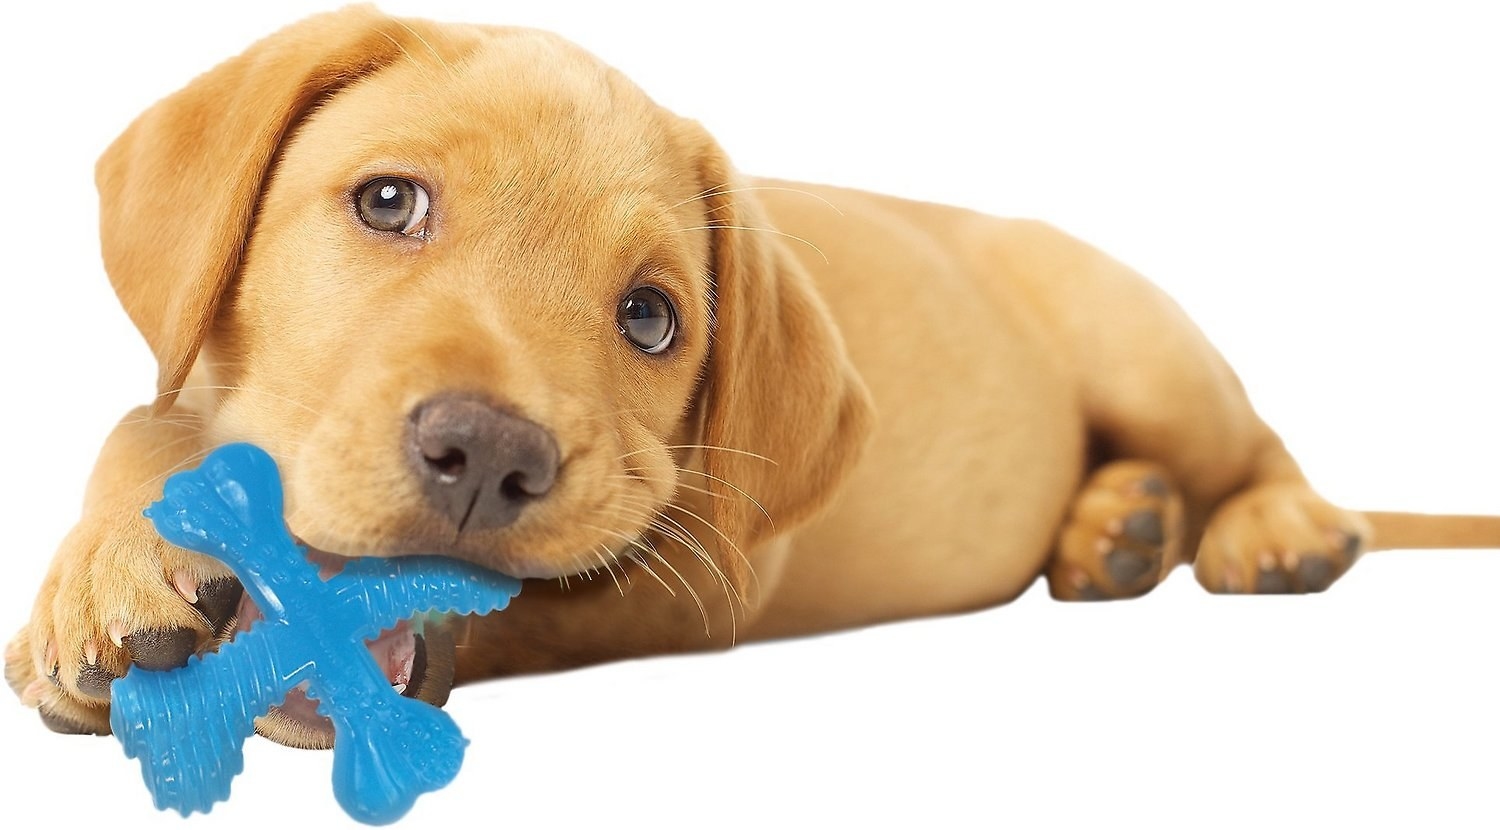 Puppy chewing on blue x-shaped chew toy